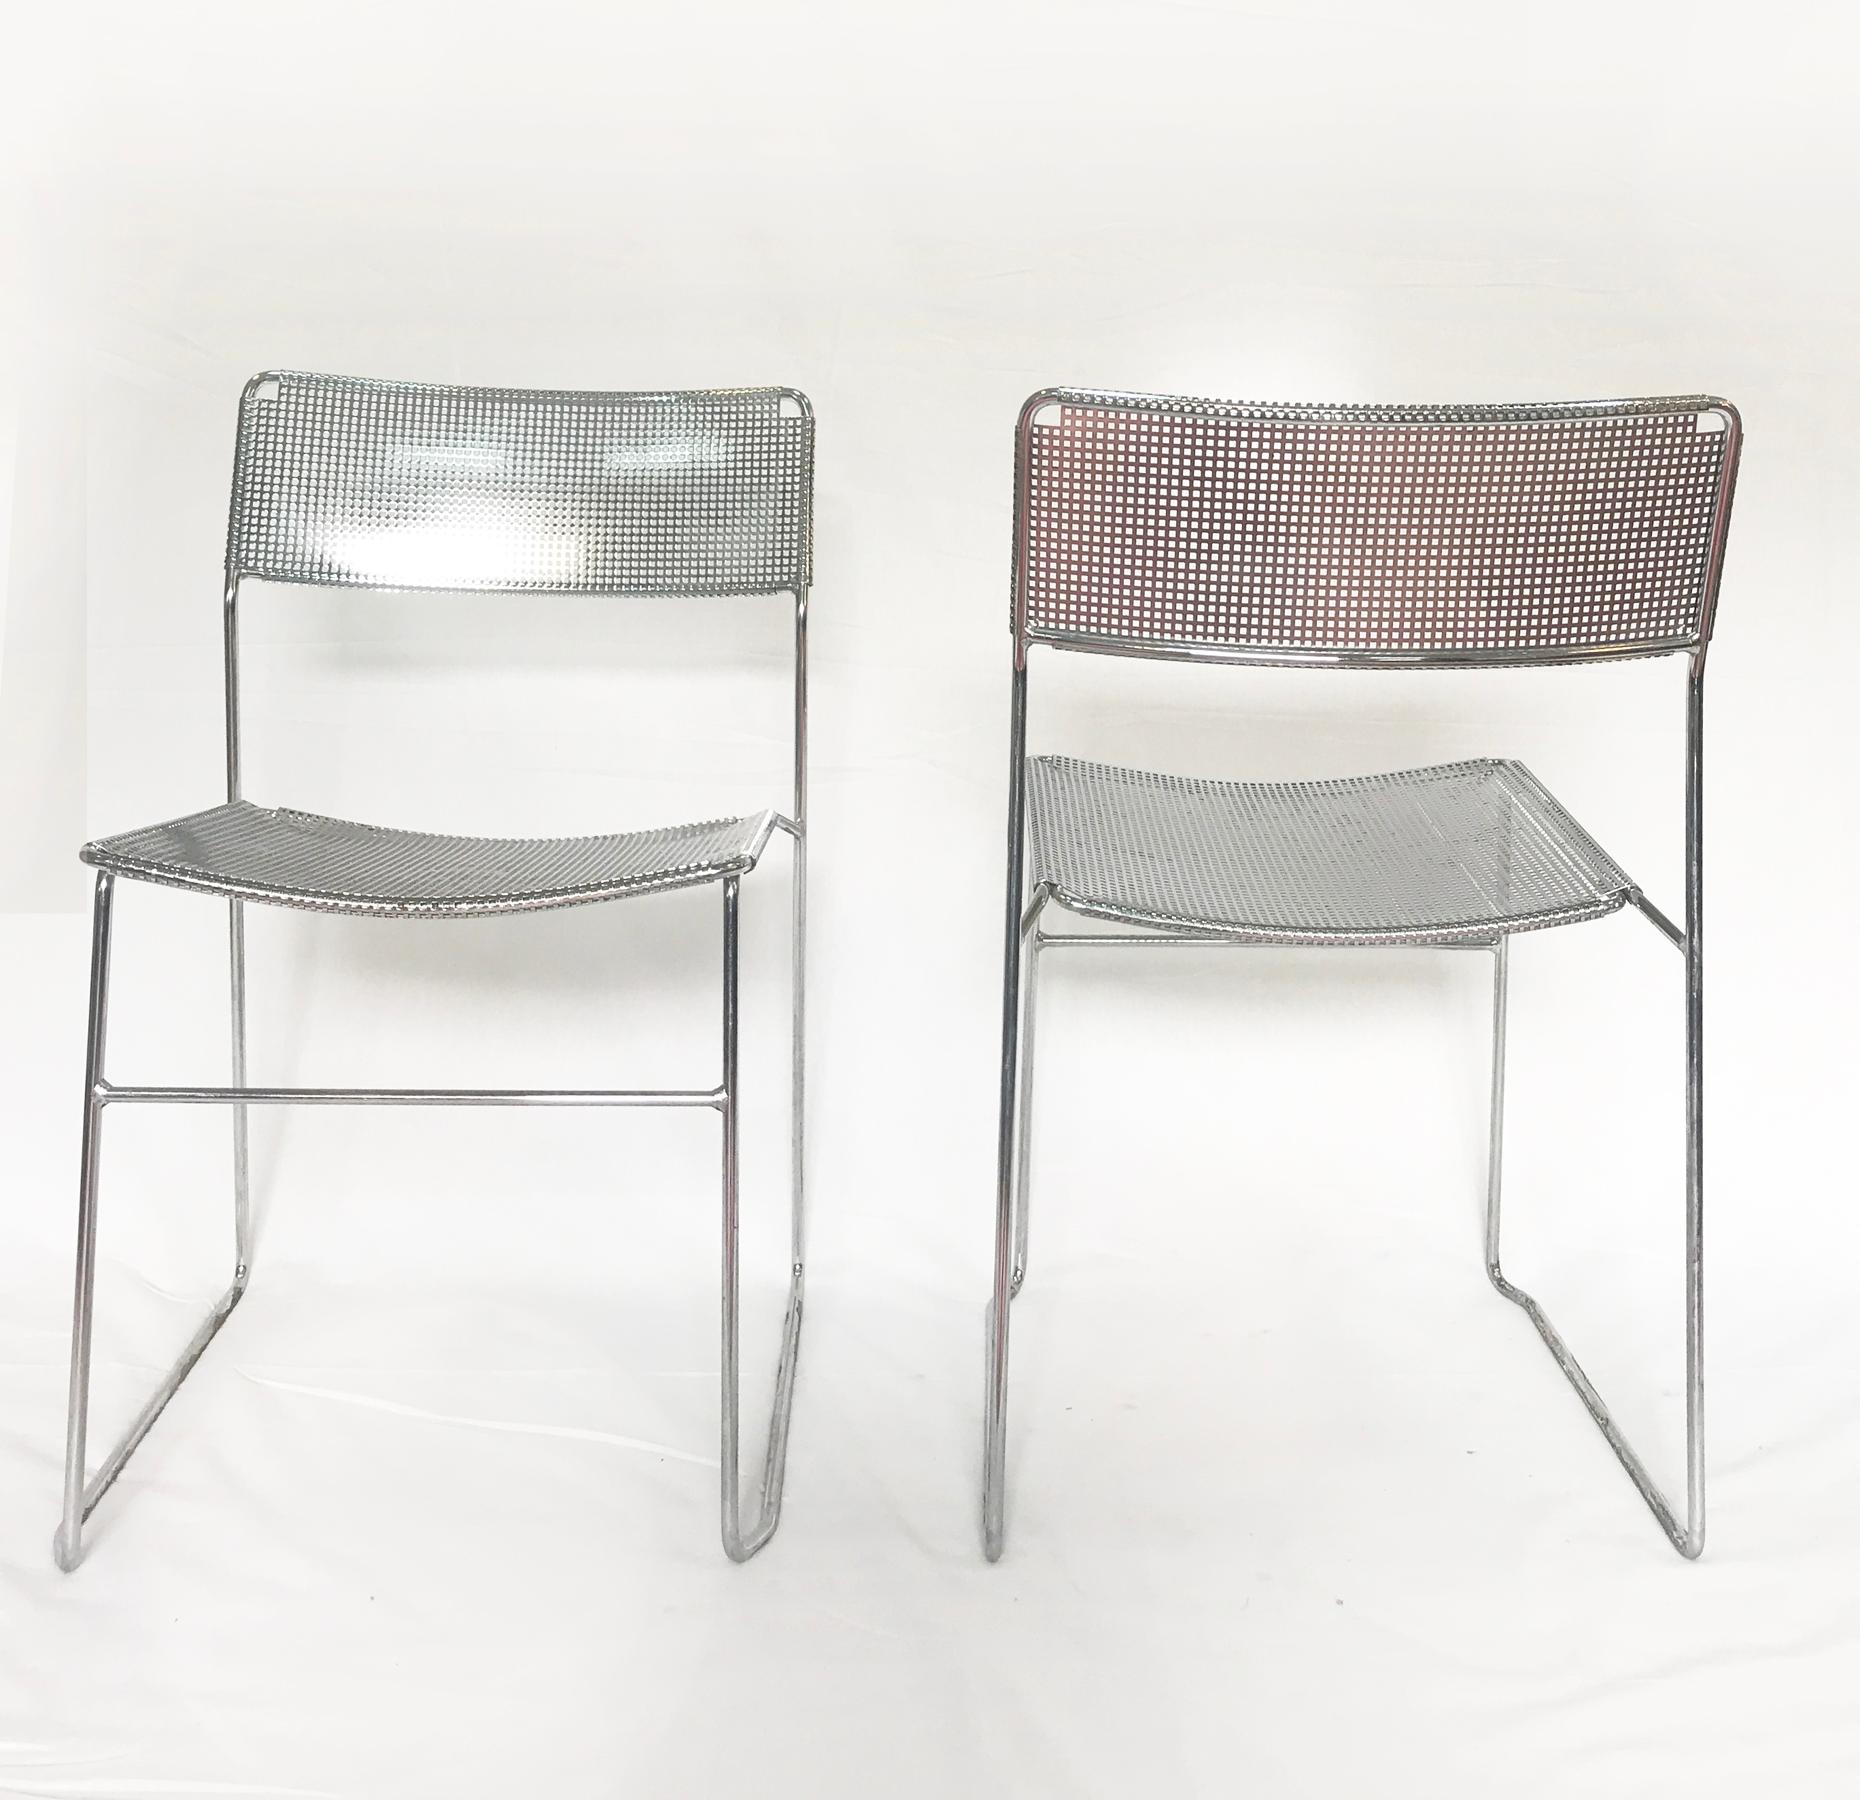 Vintage Perforated Chrome & Steel Chairs by Niels Jorgen Haugesen for Magis, Set 2